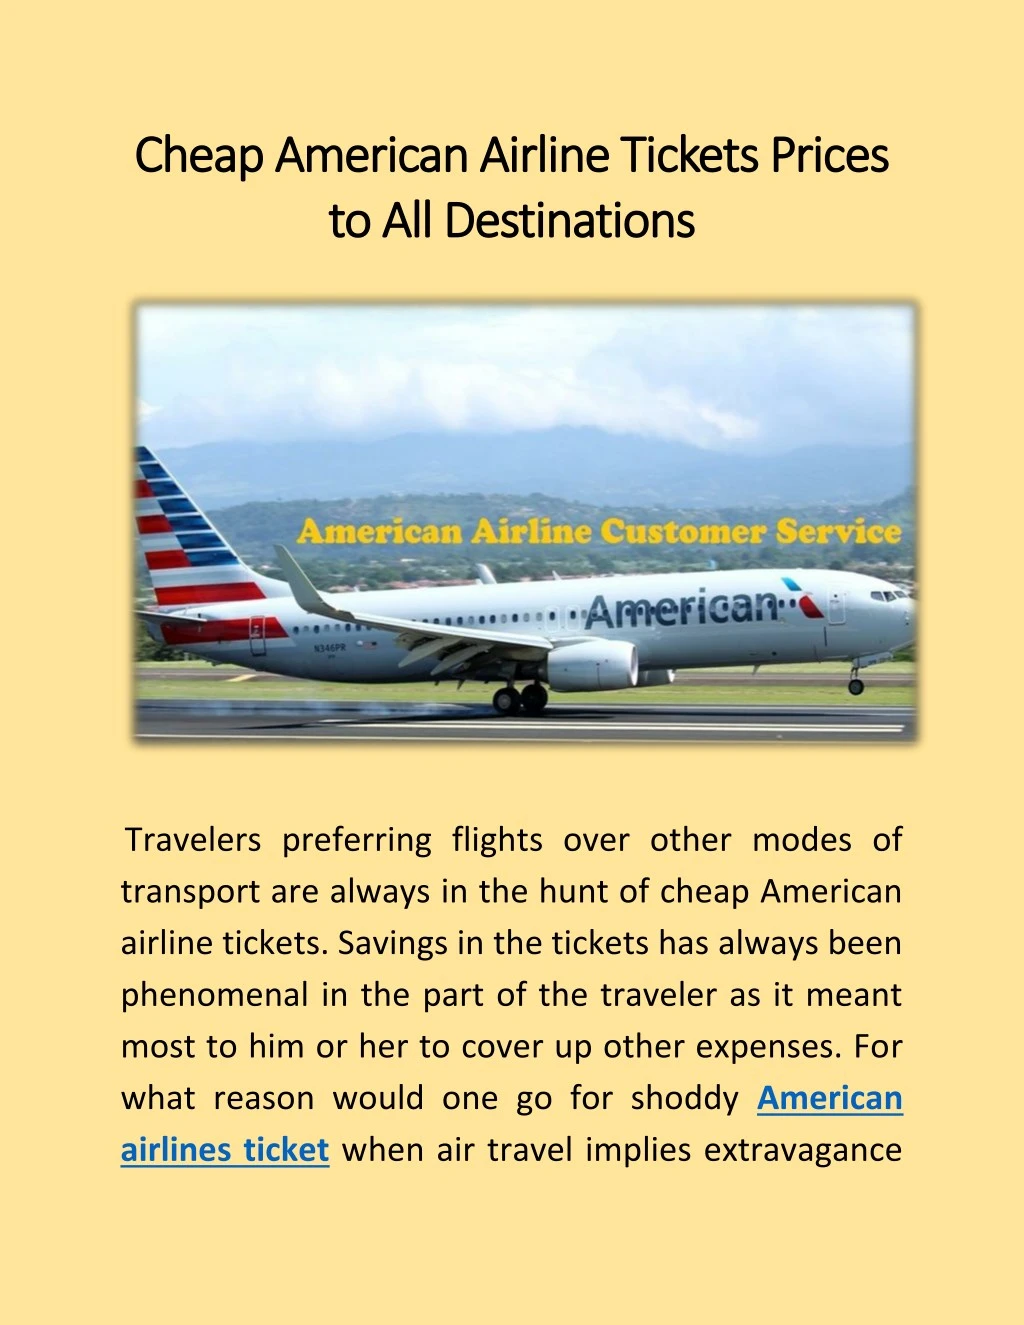 PPT Very Low Prices in American Airline Customer Service PowerPoint